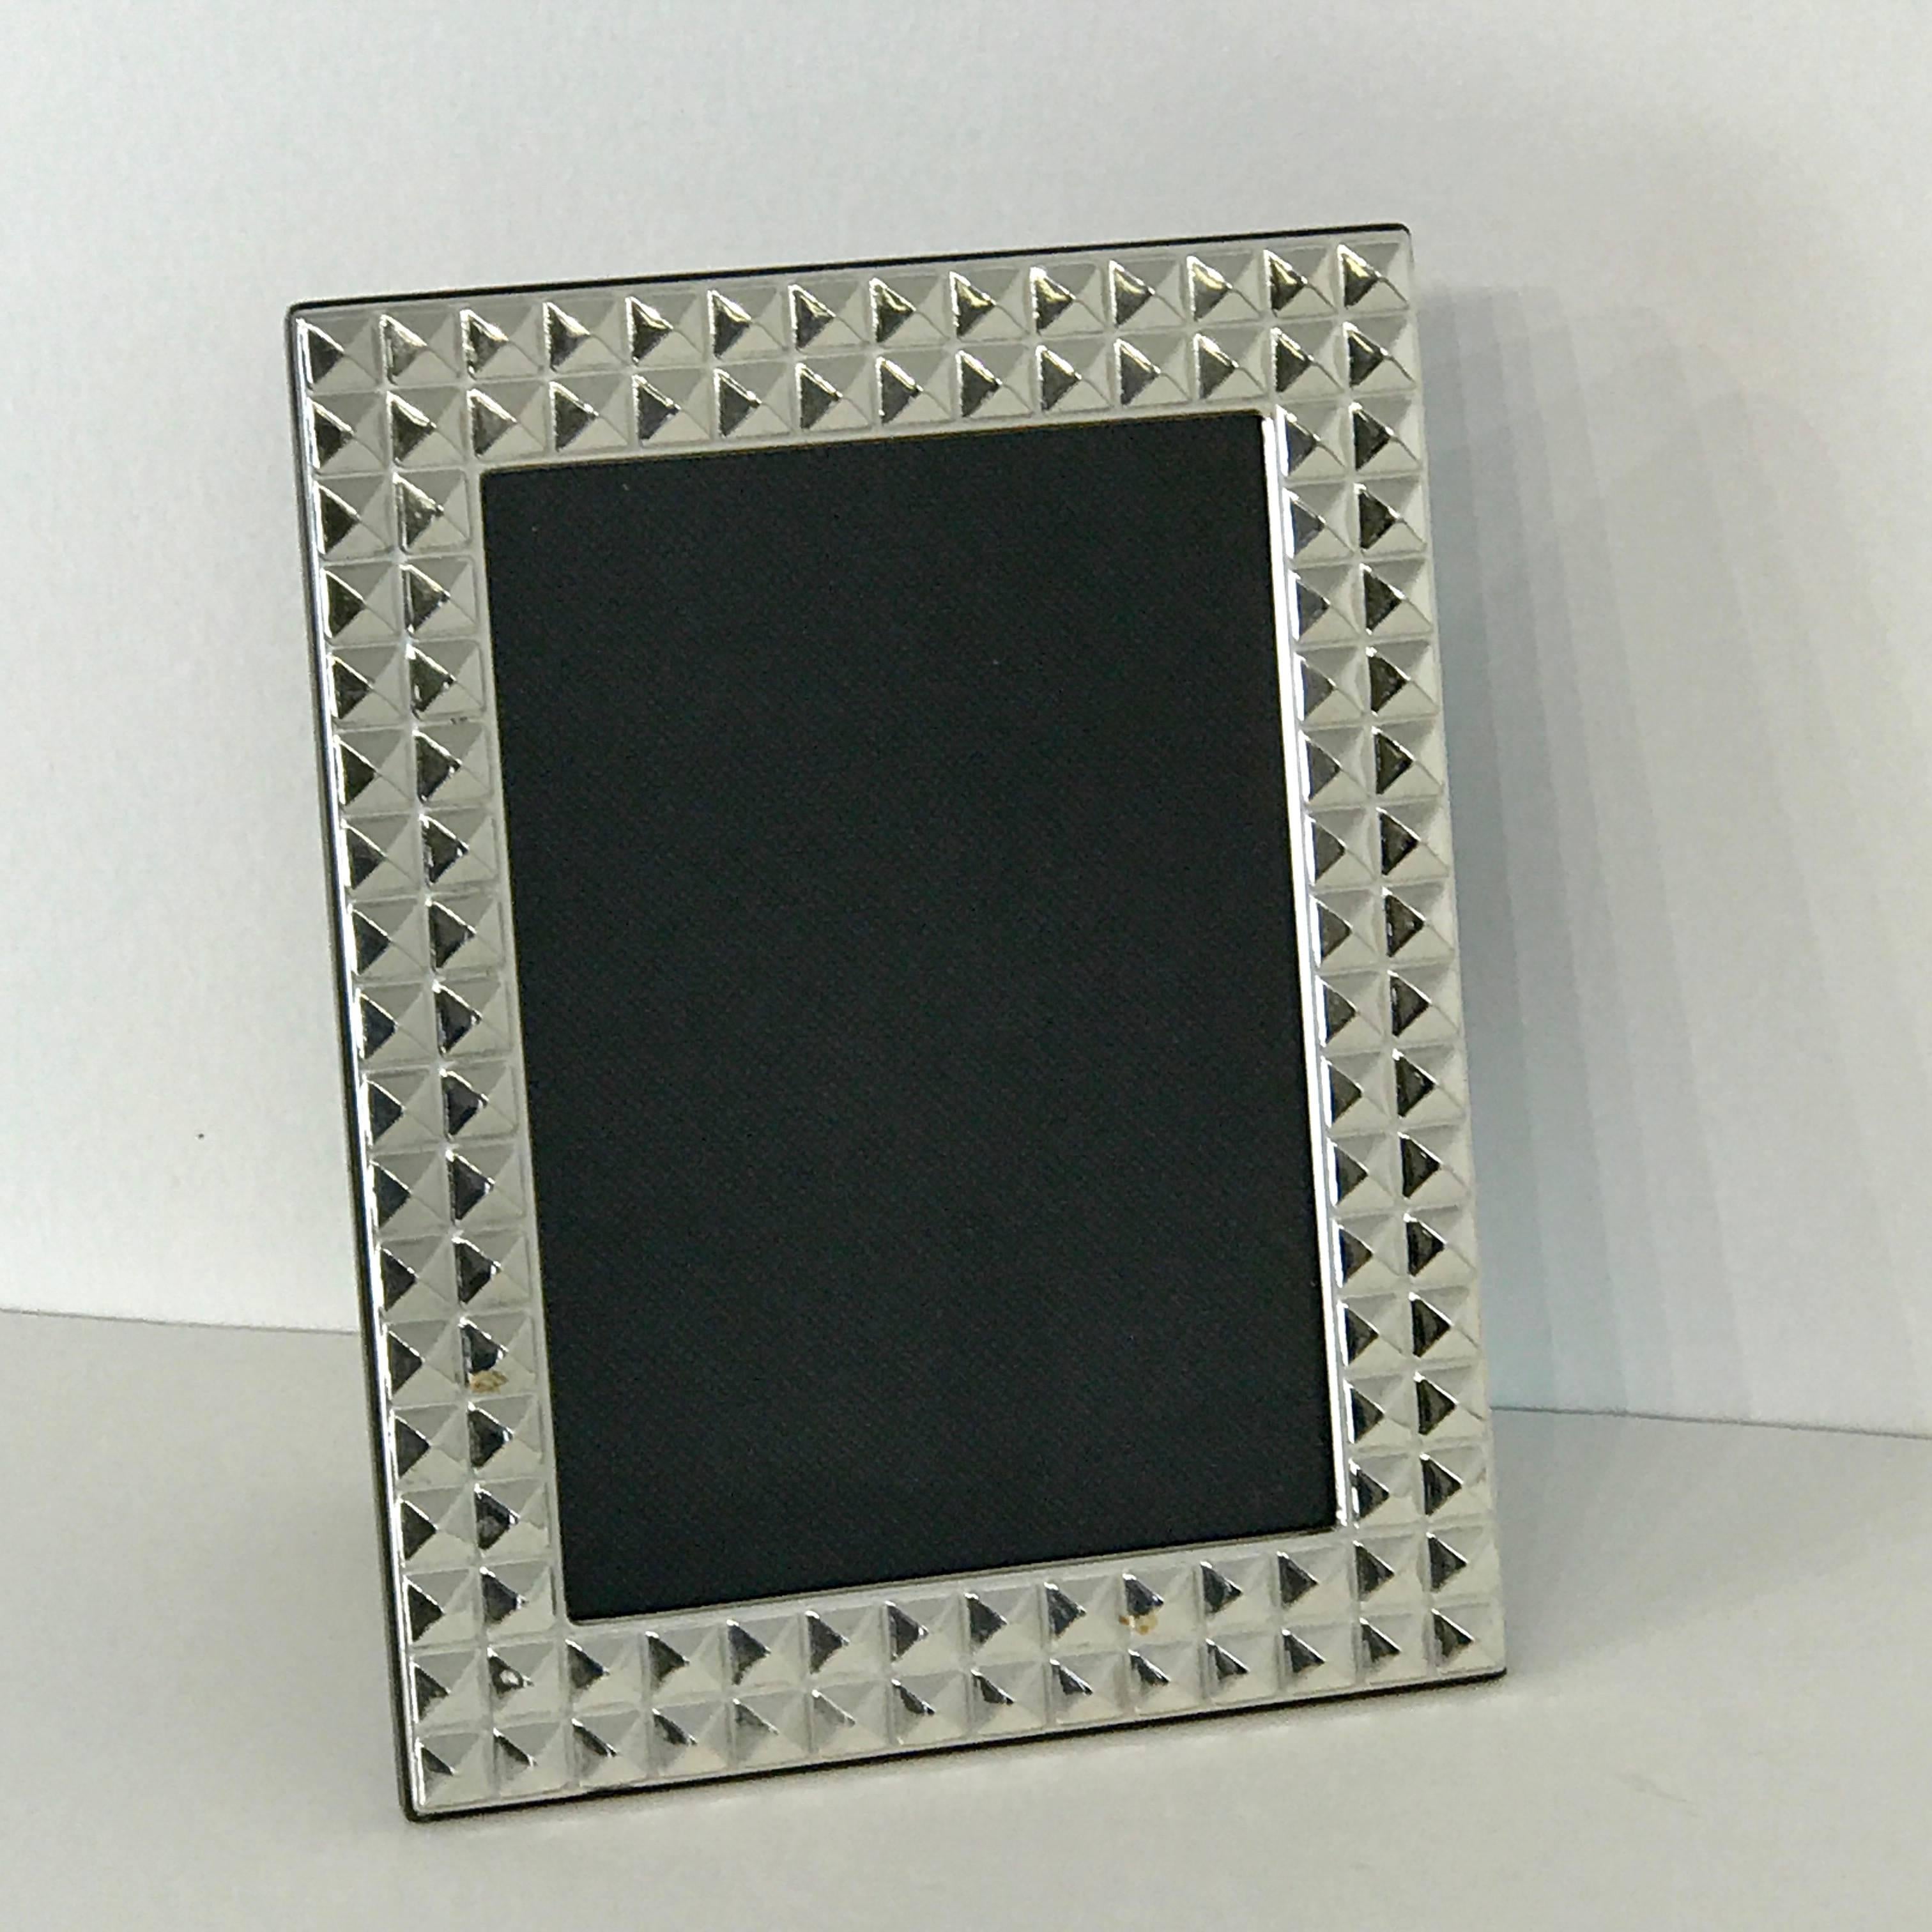 Lacquered Italian Modern Sterling Pyramidal Frame